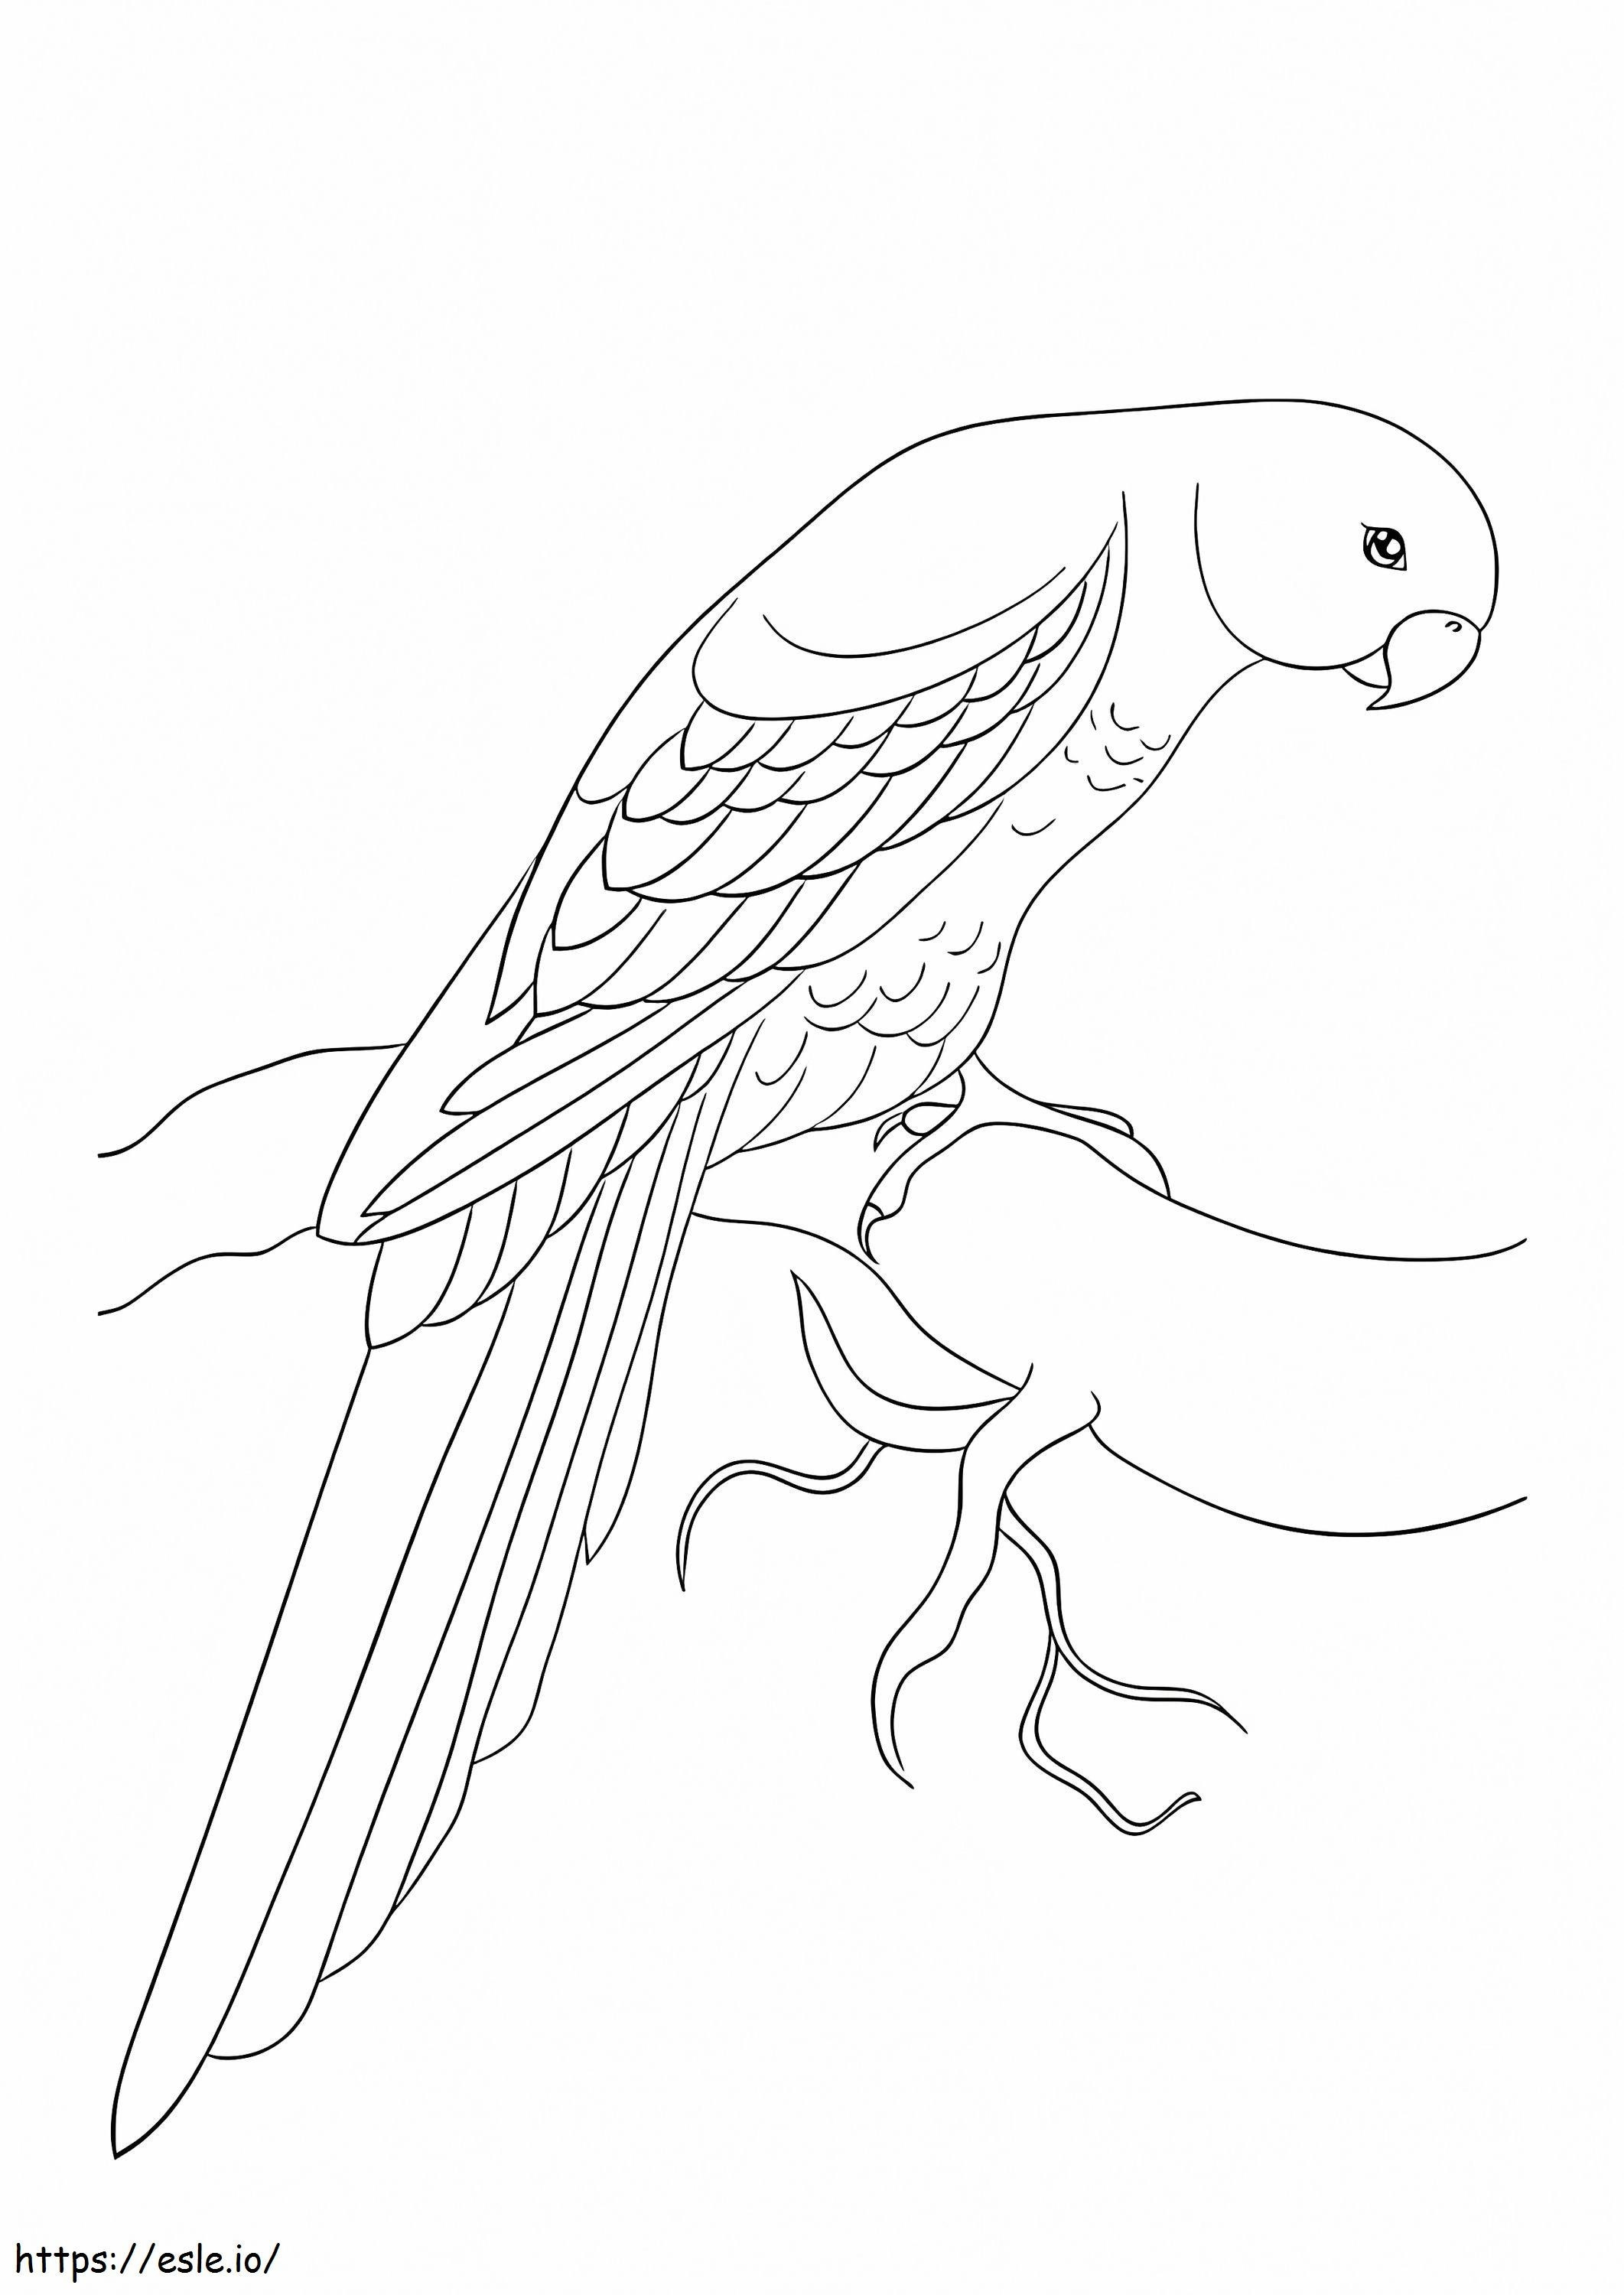 Lovely Parrot coloring page